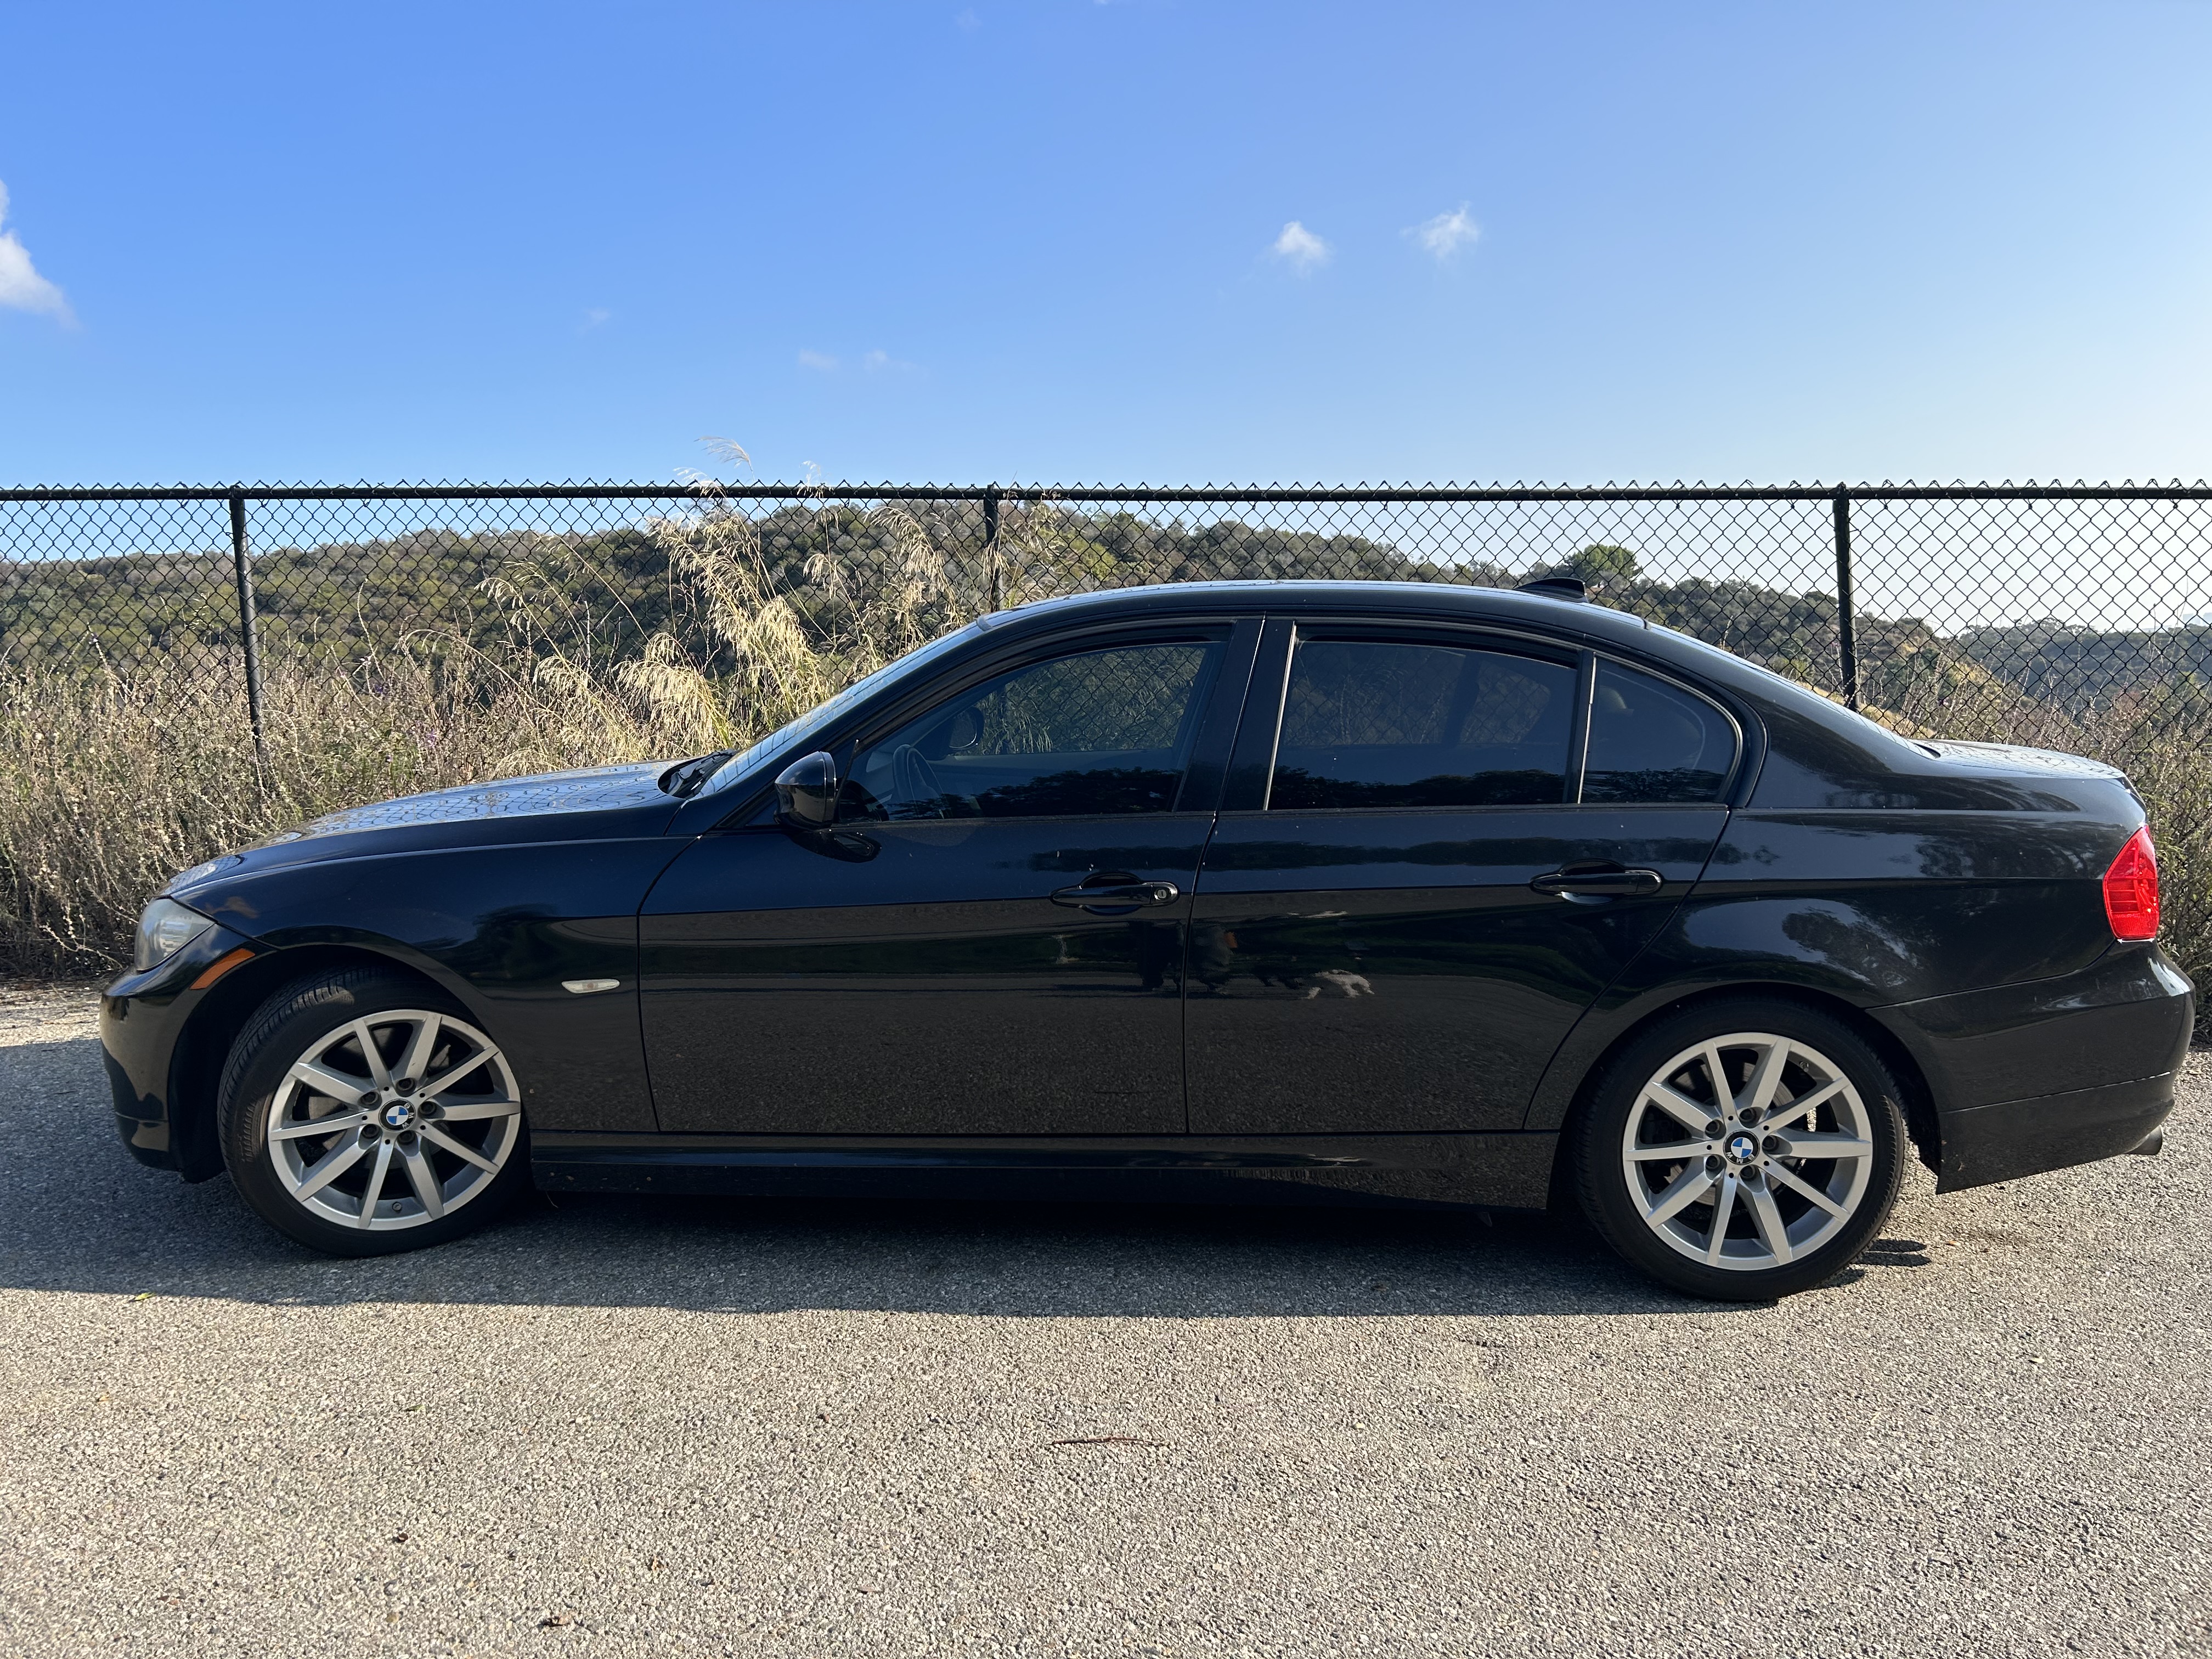 Used BMW 328i for Sale Near Me in Santa Monica, CA - Autotrader